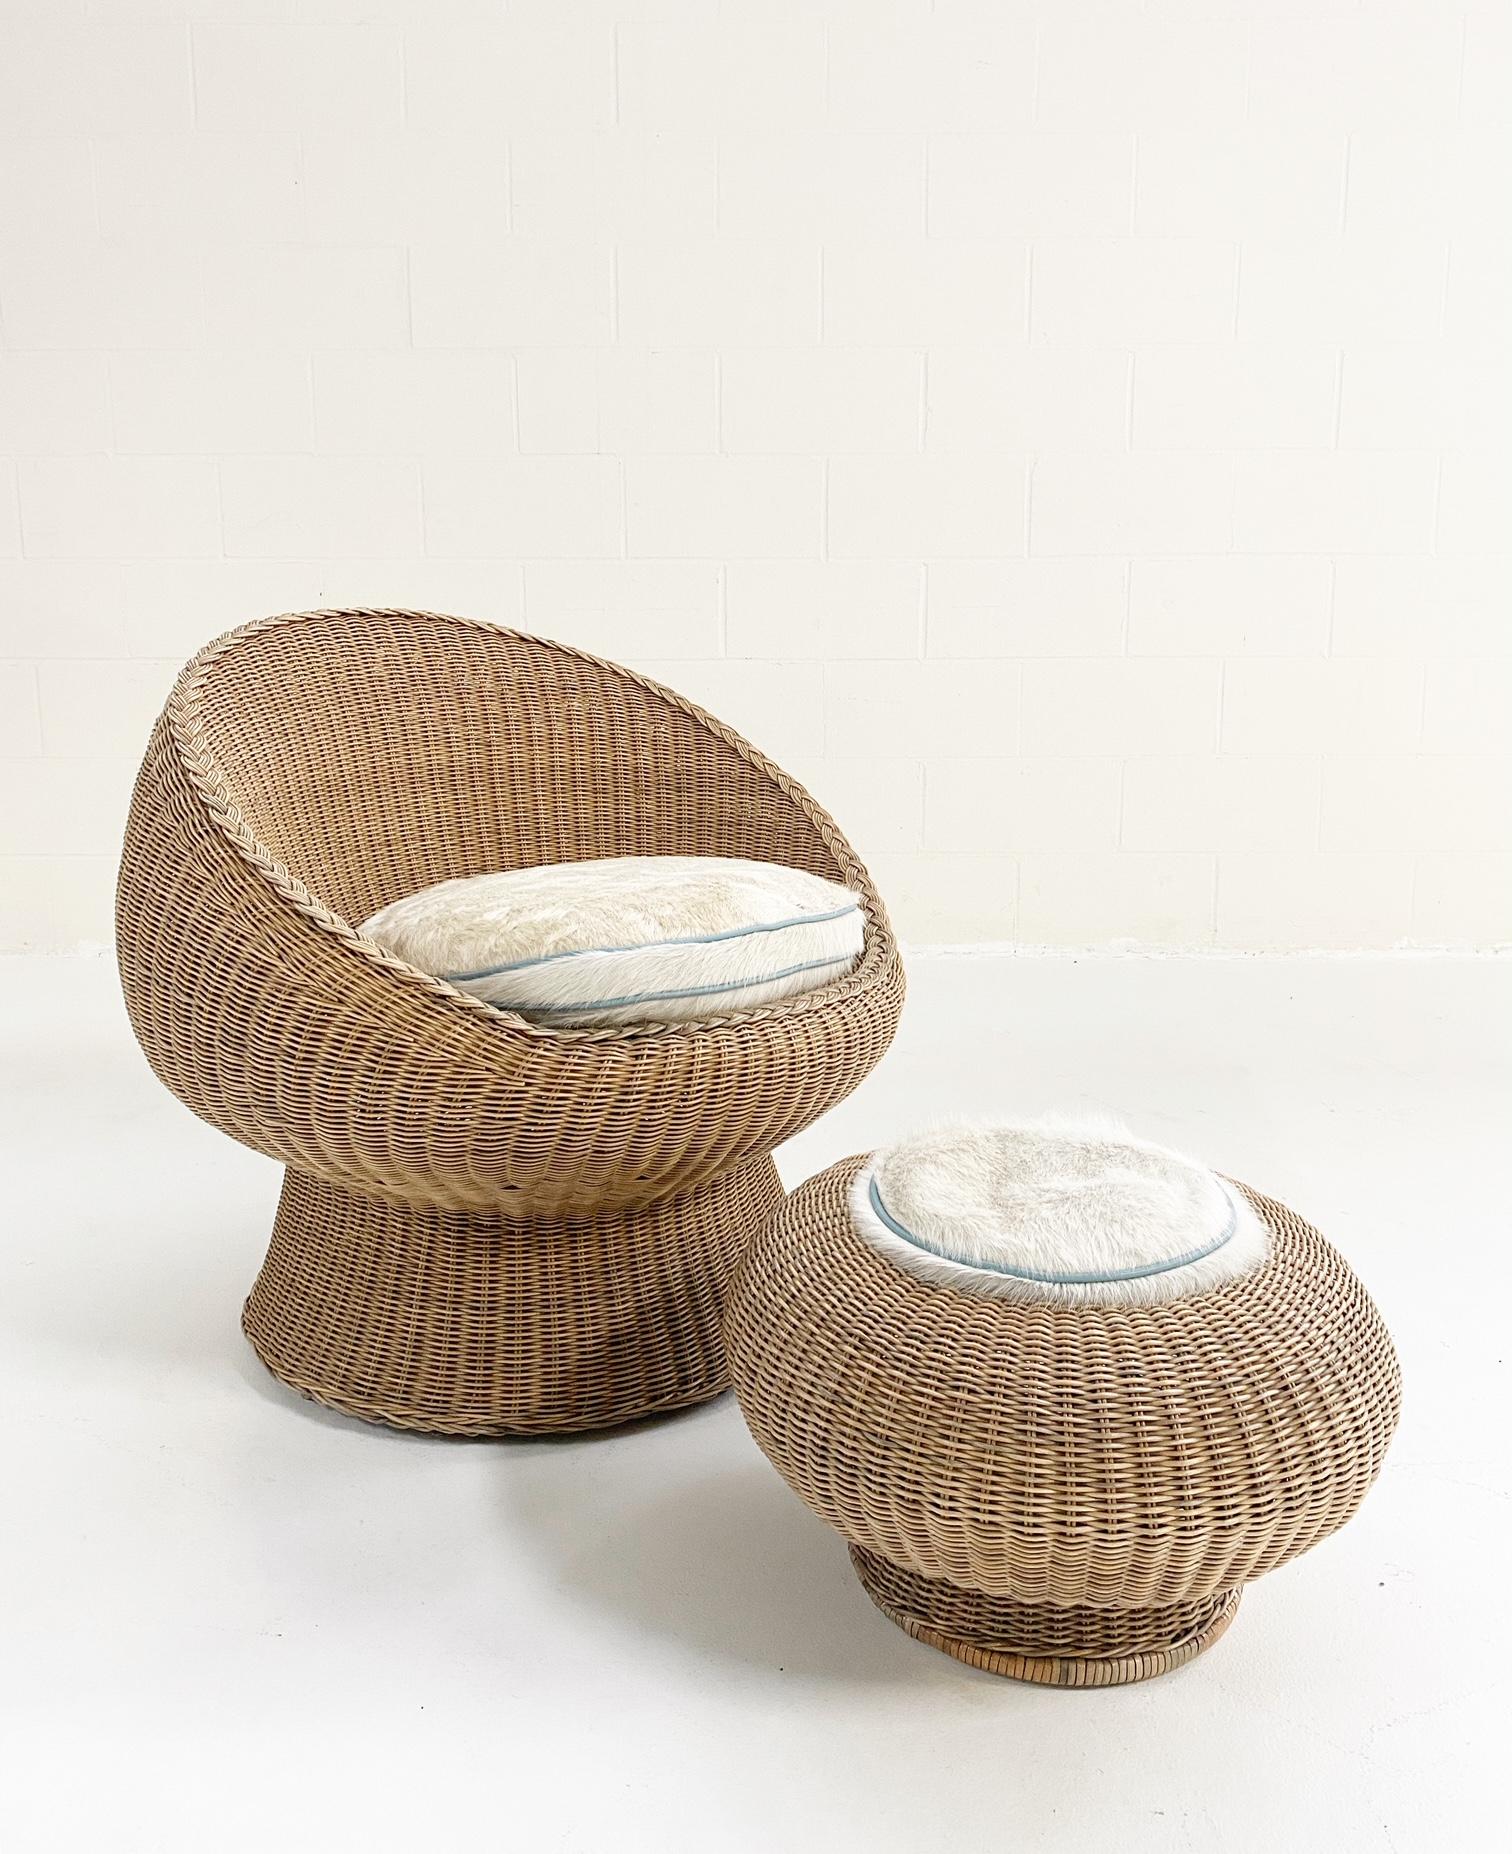 In the style of Eero Aarnio. 

The romance of rattan! Homey, versatile, and always stylish. This chair and ottoman set is part of a 10-piece set but we have decided to sell the pieces separately. You can view the whole set at this link.

For the